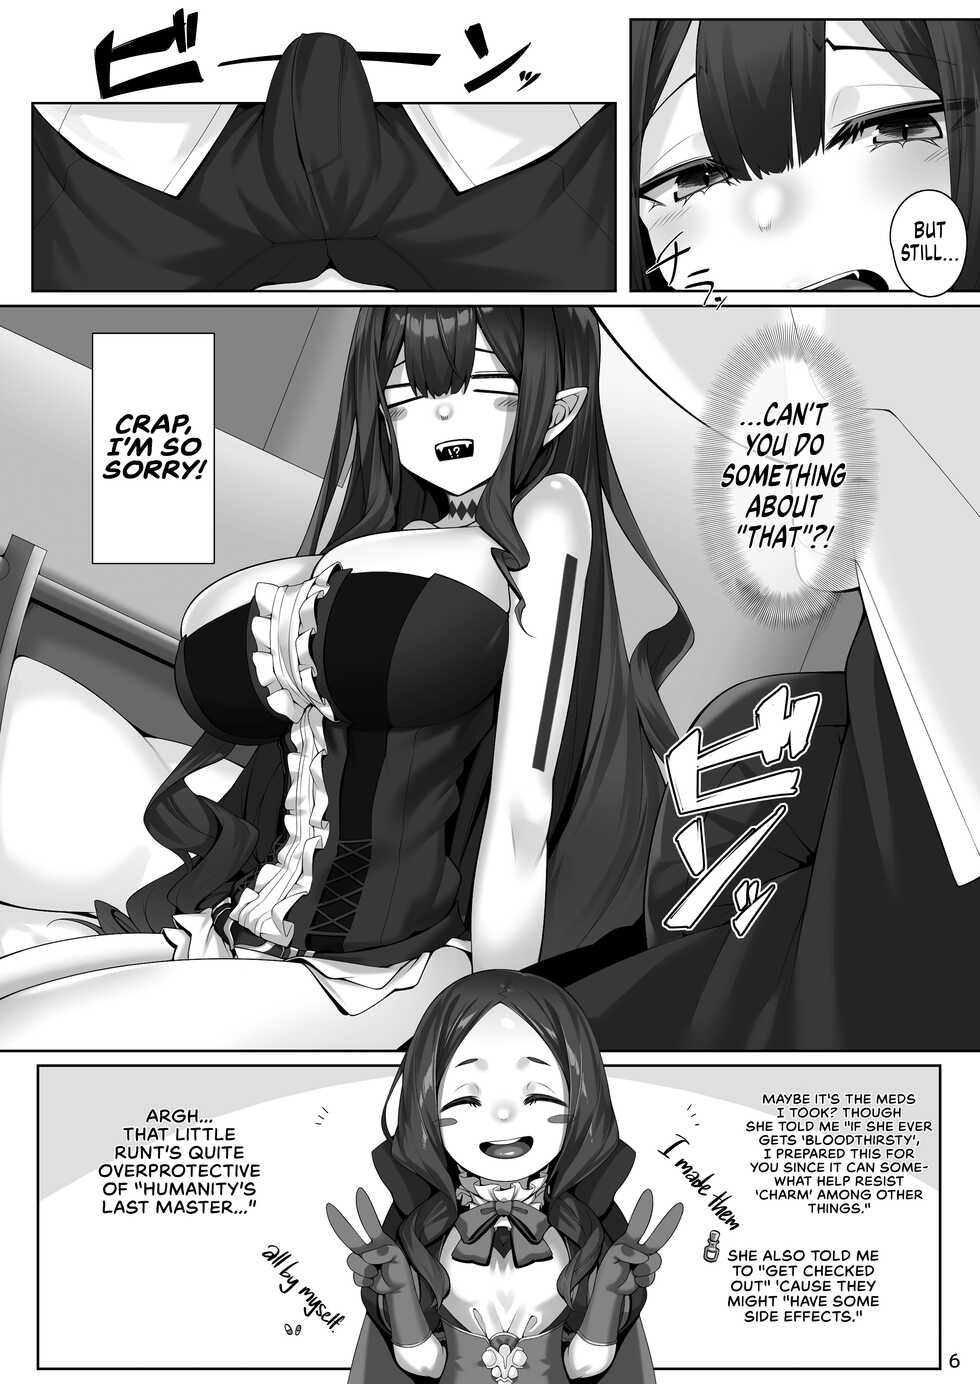 [Watochip Melonpan (Watosu)] Baobhan Sith to Iroiro Ecchi Hon | Various Dirty Deeds with Baobhan Sith (Fate/Grand Order) [English] [UncontrolSwitchOverflow] [Digital] - Page 6